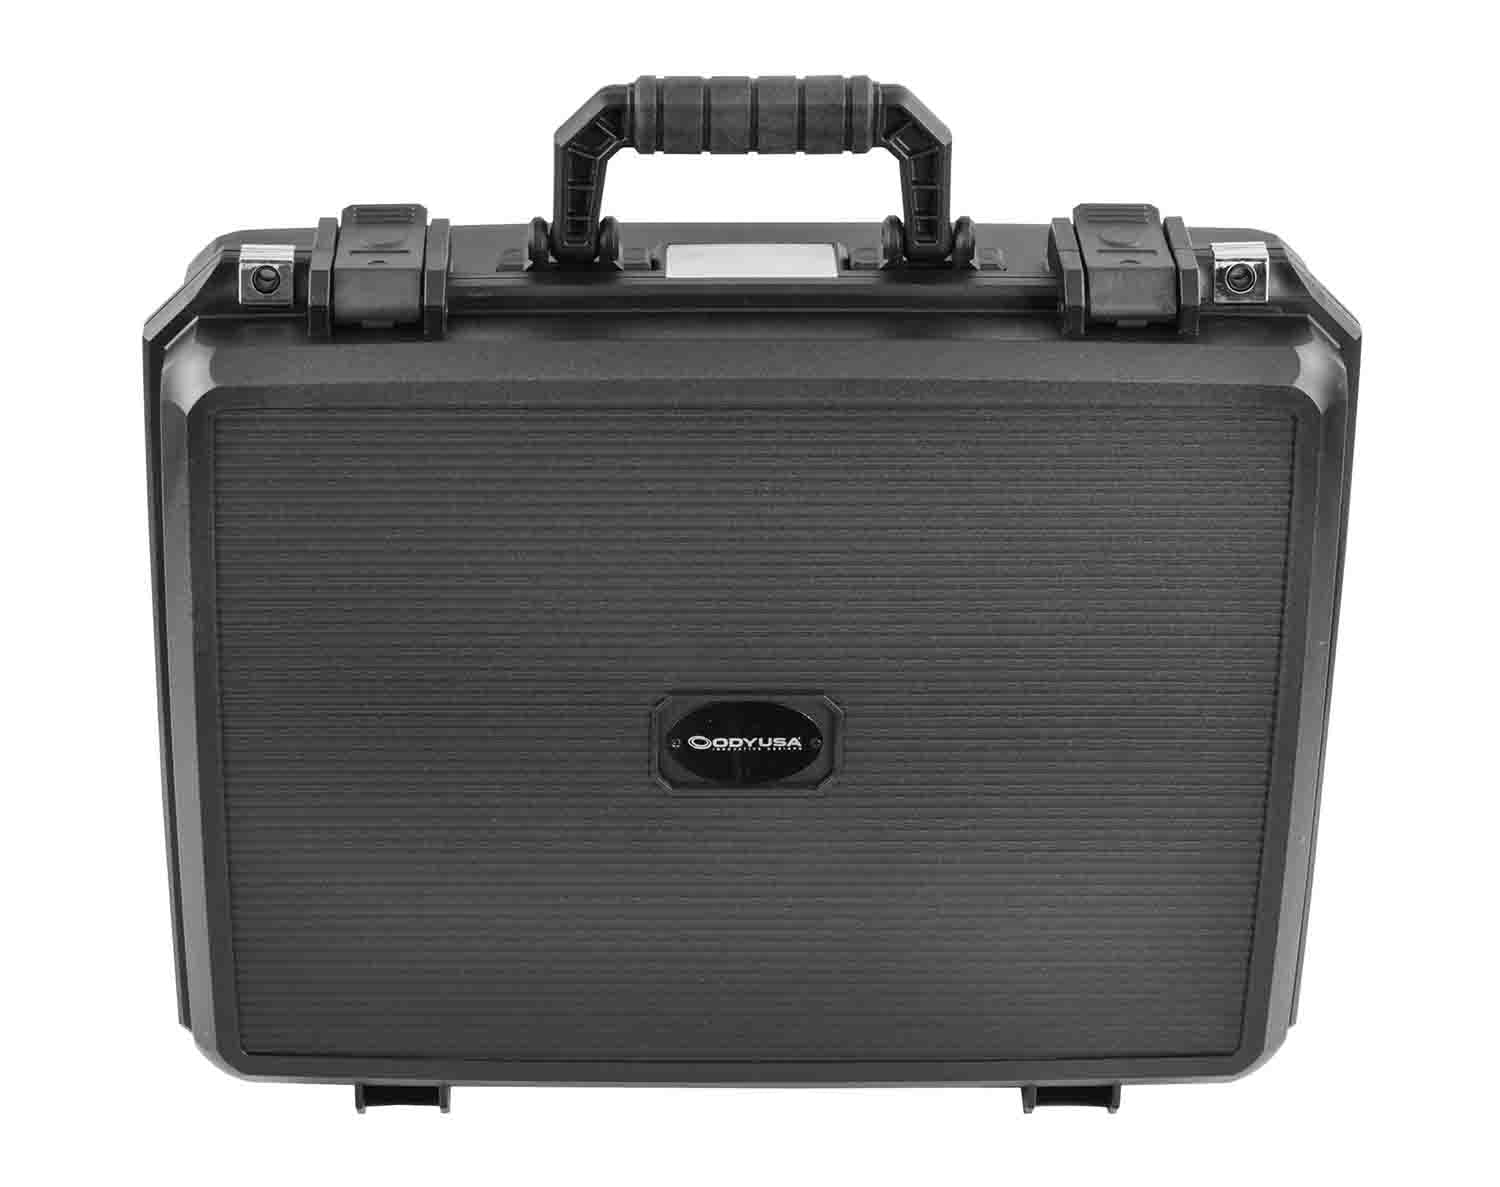 Odyssey VU171205 Bottom Interior with Pluck Foams Injection-Molded Utility Case - Hollywood DJ